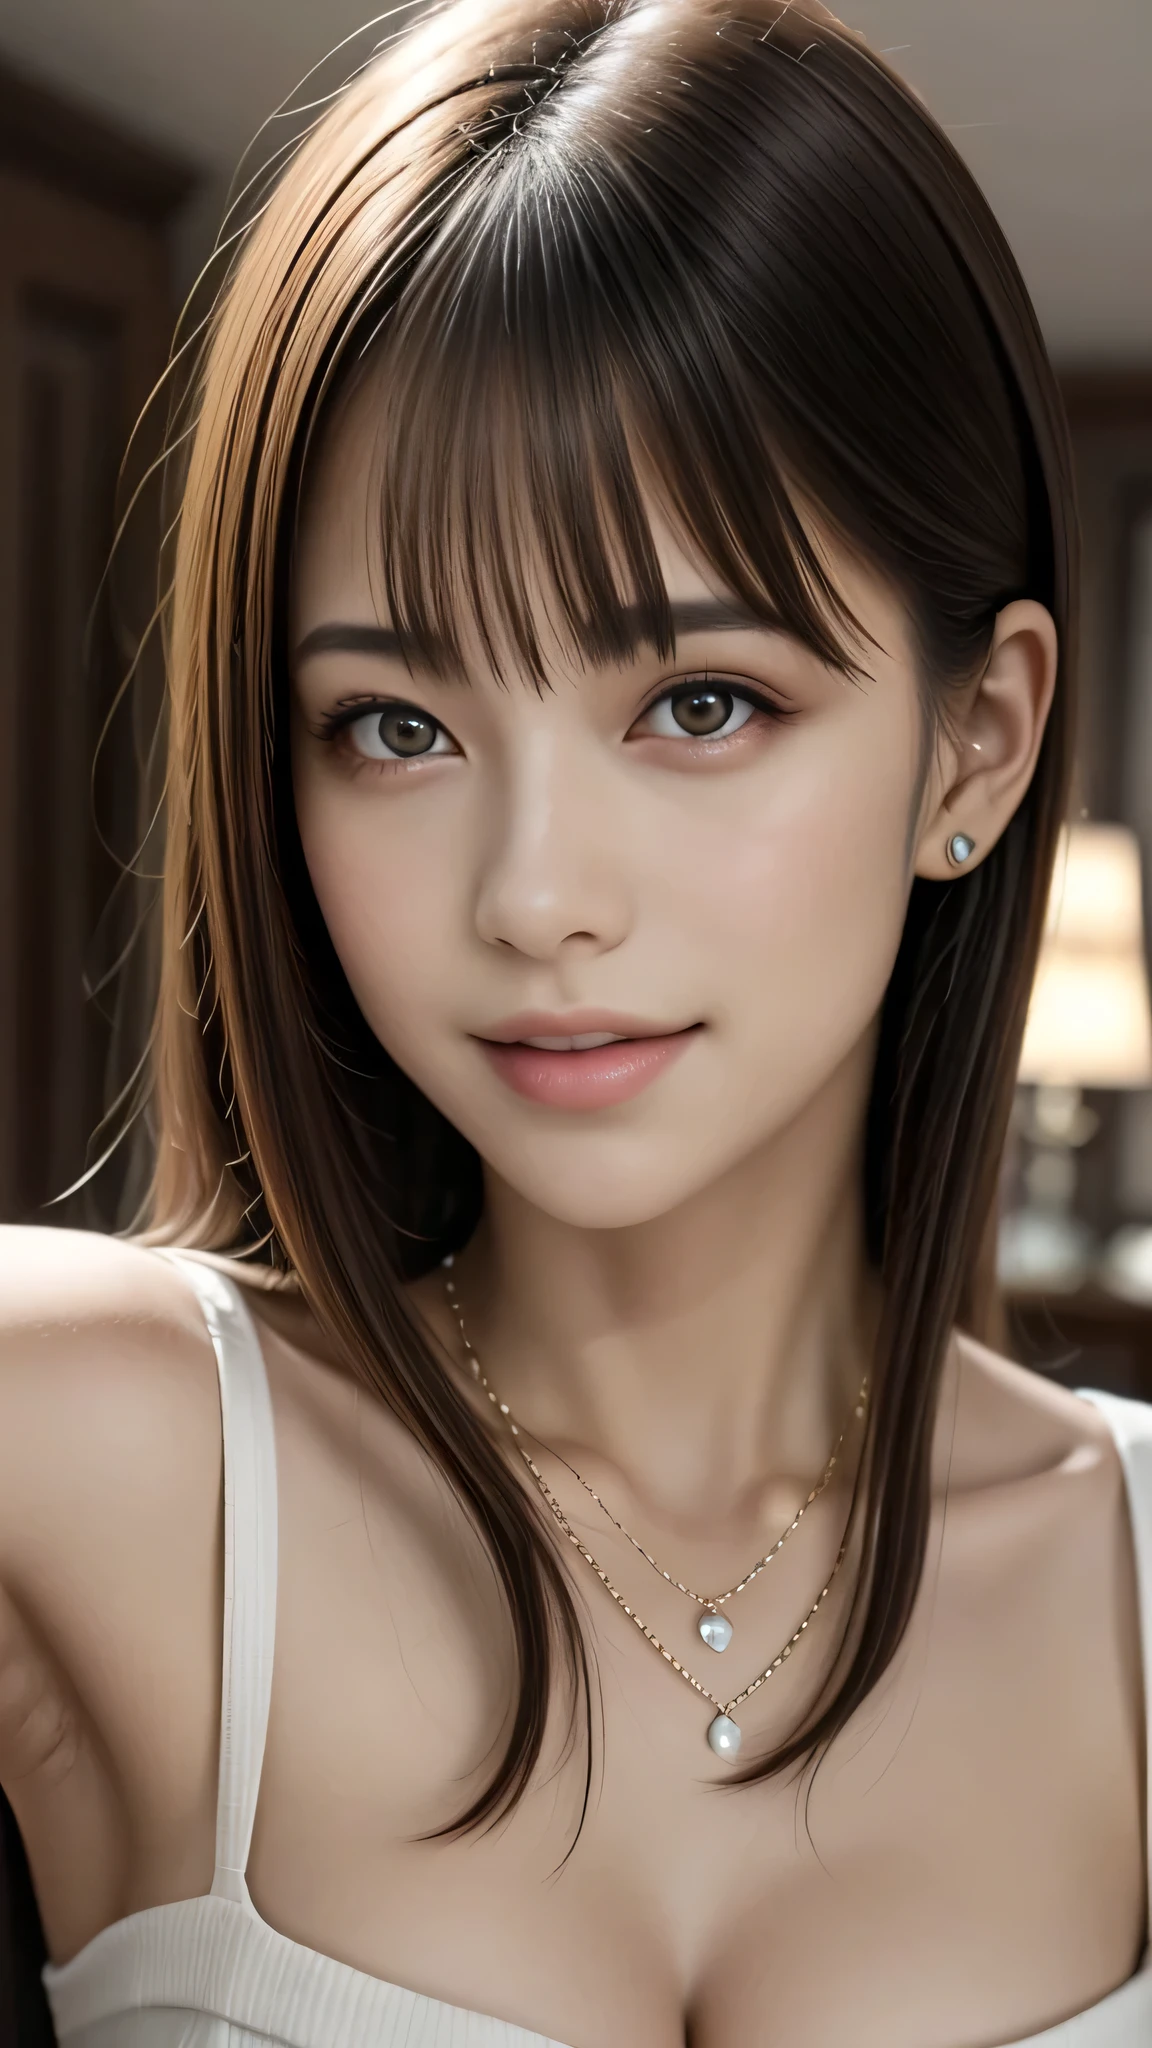 Great quality, masterpiece, High Resolutiupon, One girl, blush, (Captivating smile: 0.8), hair accessory, necklace, jewelry, beauty, upon_body, Tyndall effect, Realistic, Shadow Room, Light Edge, Two-tupone Lighting, (Skin with attention to detail: 1.2), 8k UHD, SLR, Soft Light, high quality, Volumetric lighting, snapshot, High Resolutiupon, 4K, 8k, Background Blur, Real Persupon